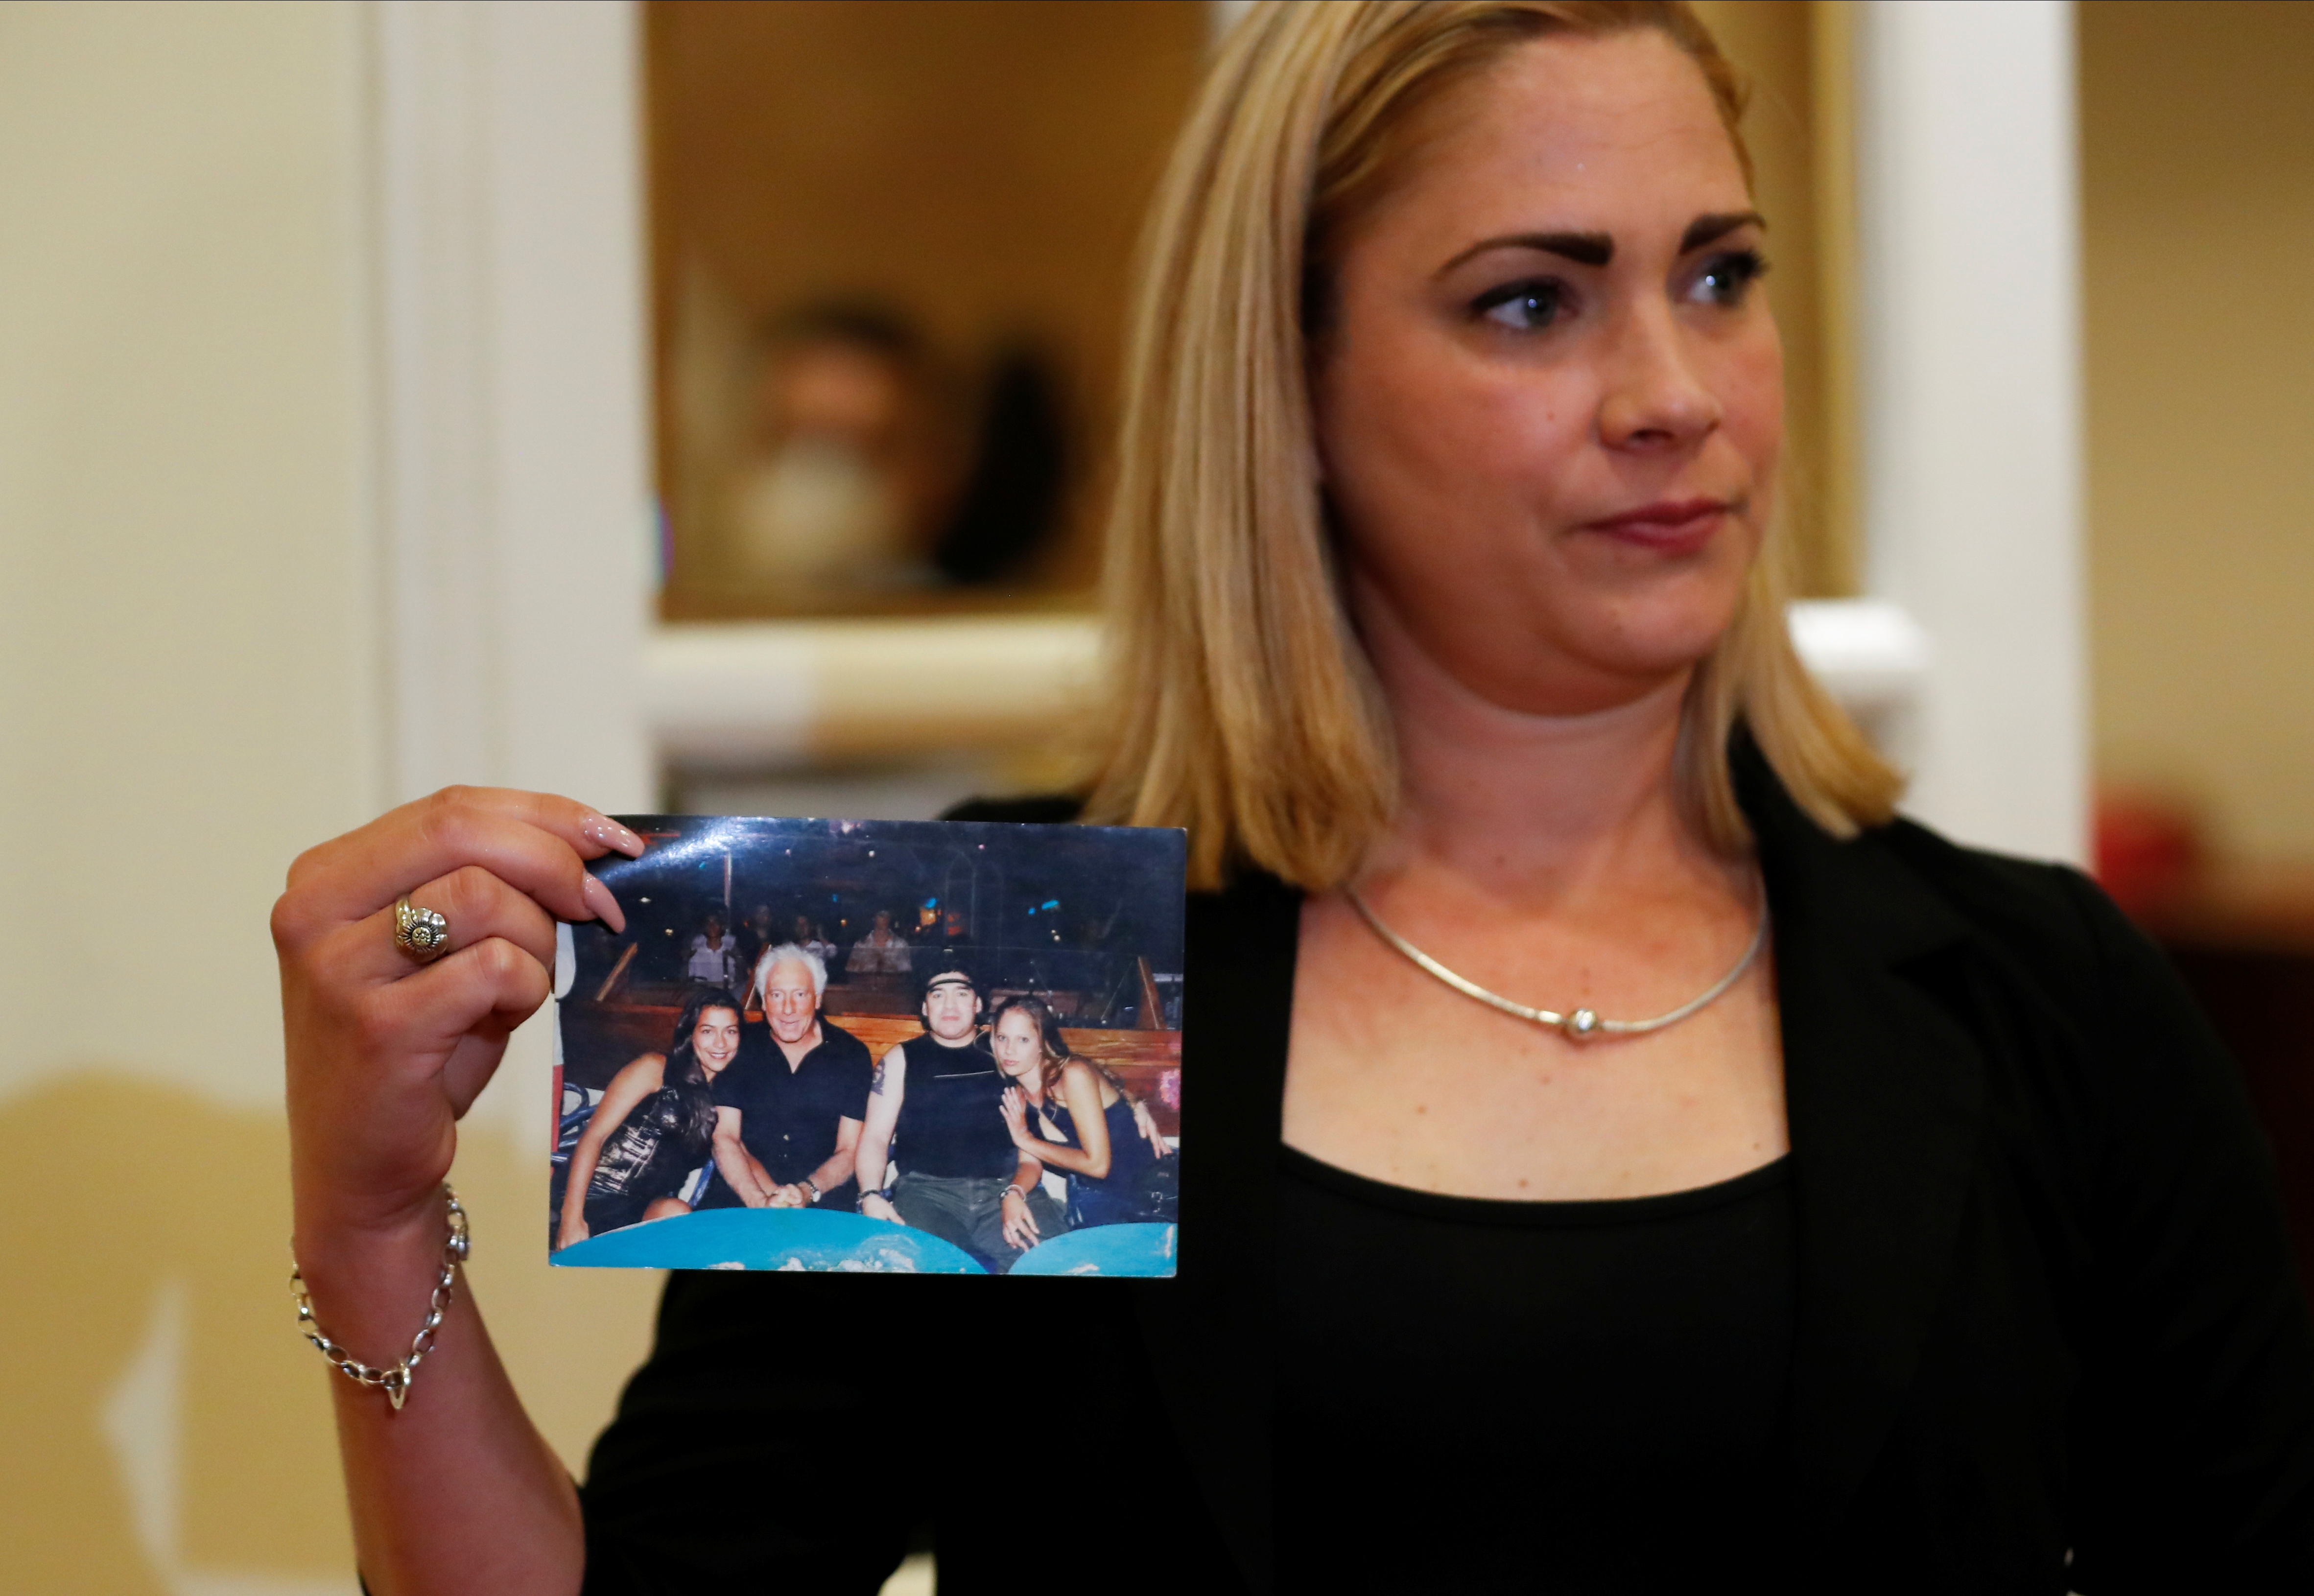 Cuban Mavys Alvarez, who testified against soccer legend Diego Armando Maradona in a case for alleged human trafficking, holds a picture of her sitting next to Maradona, his former agent Guillermo Coppola and an unidentified woman, after a news conference with foreign media, in Buenos Aires, Argentina November 22, 2021. REUTERS/Agustin Marcarian NO RESALES. NO ARCHIVES